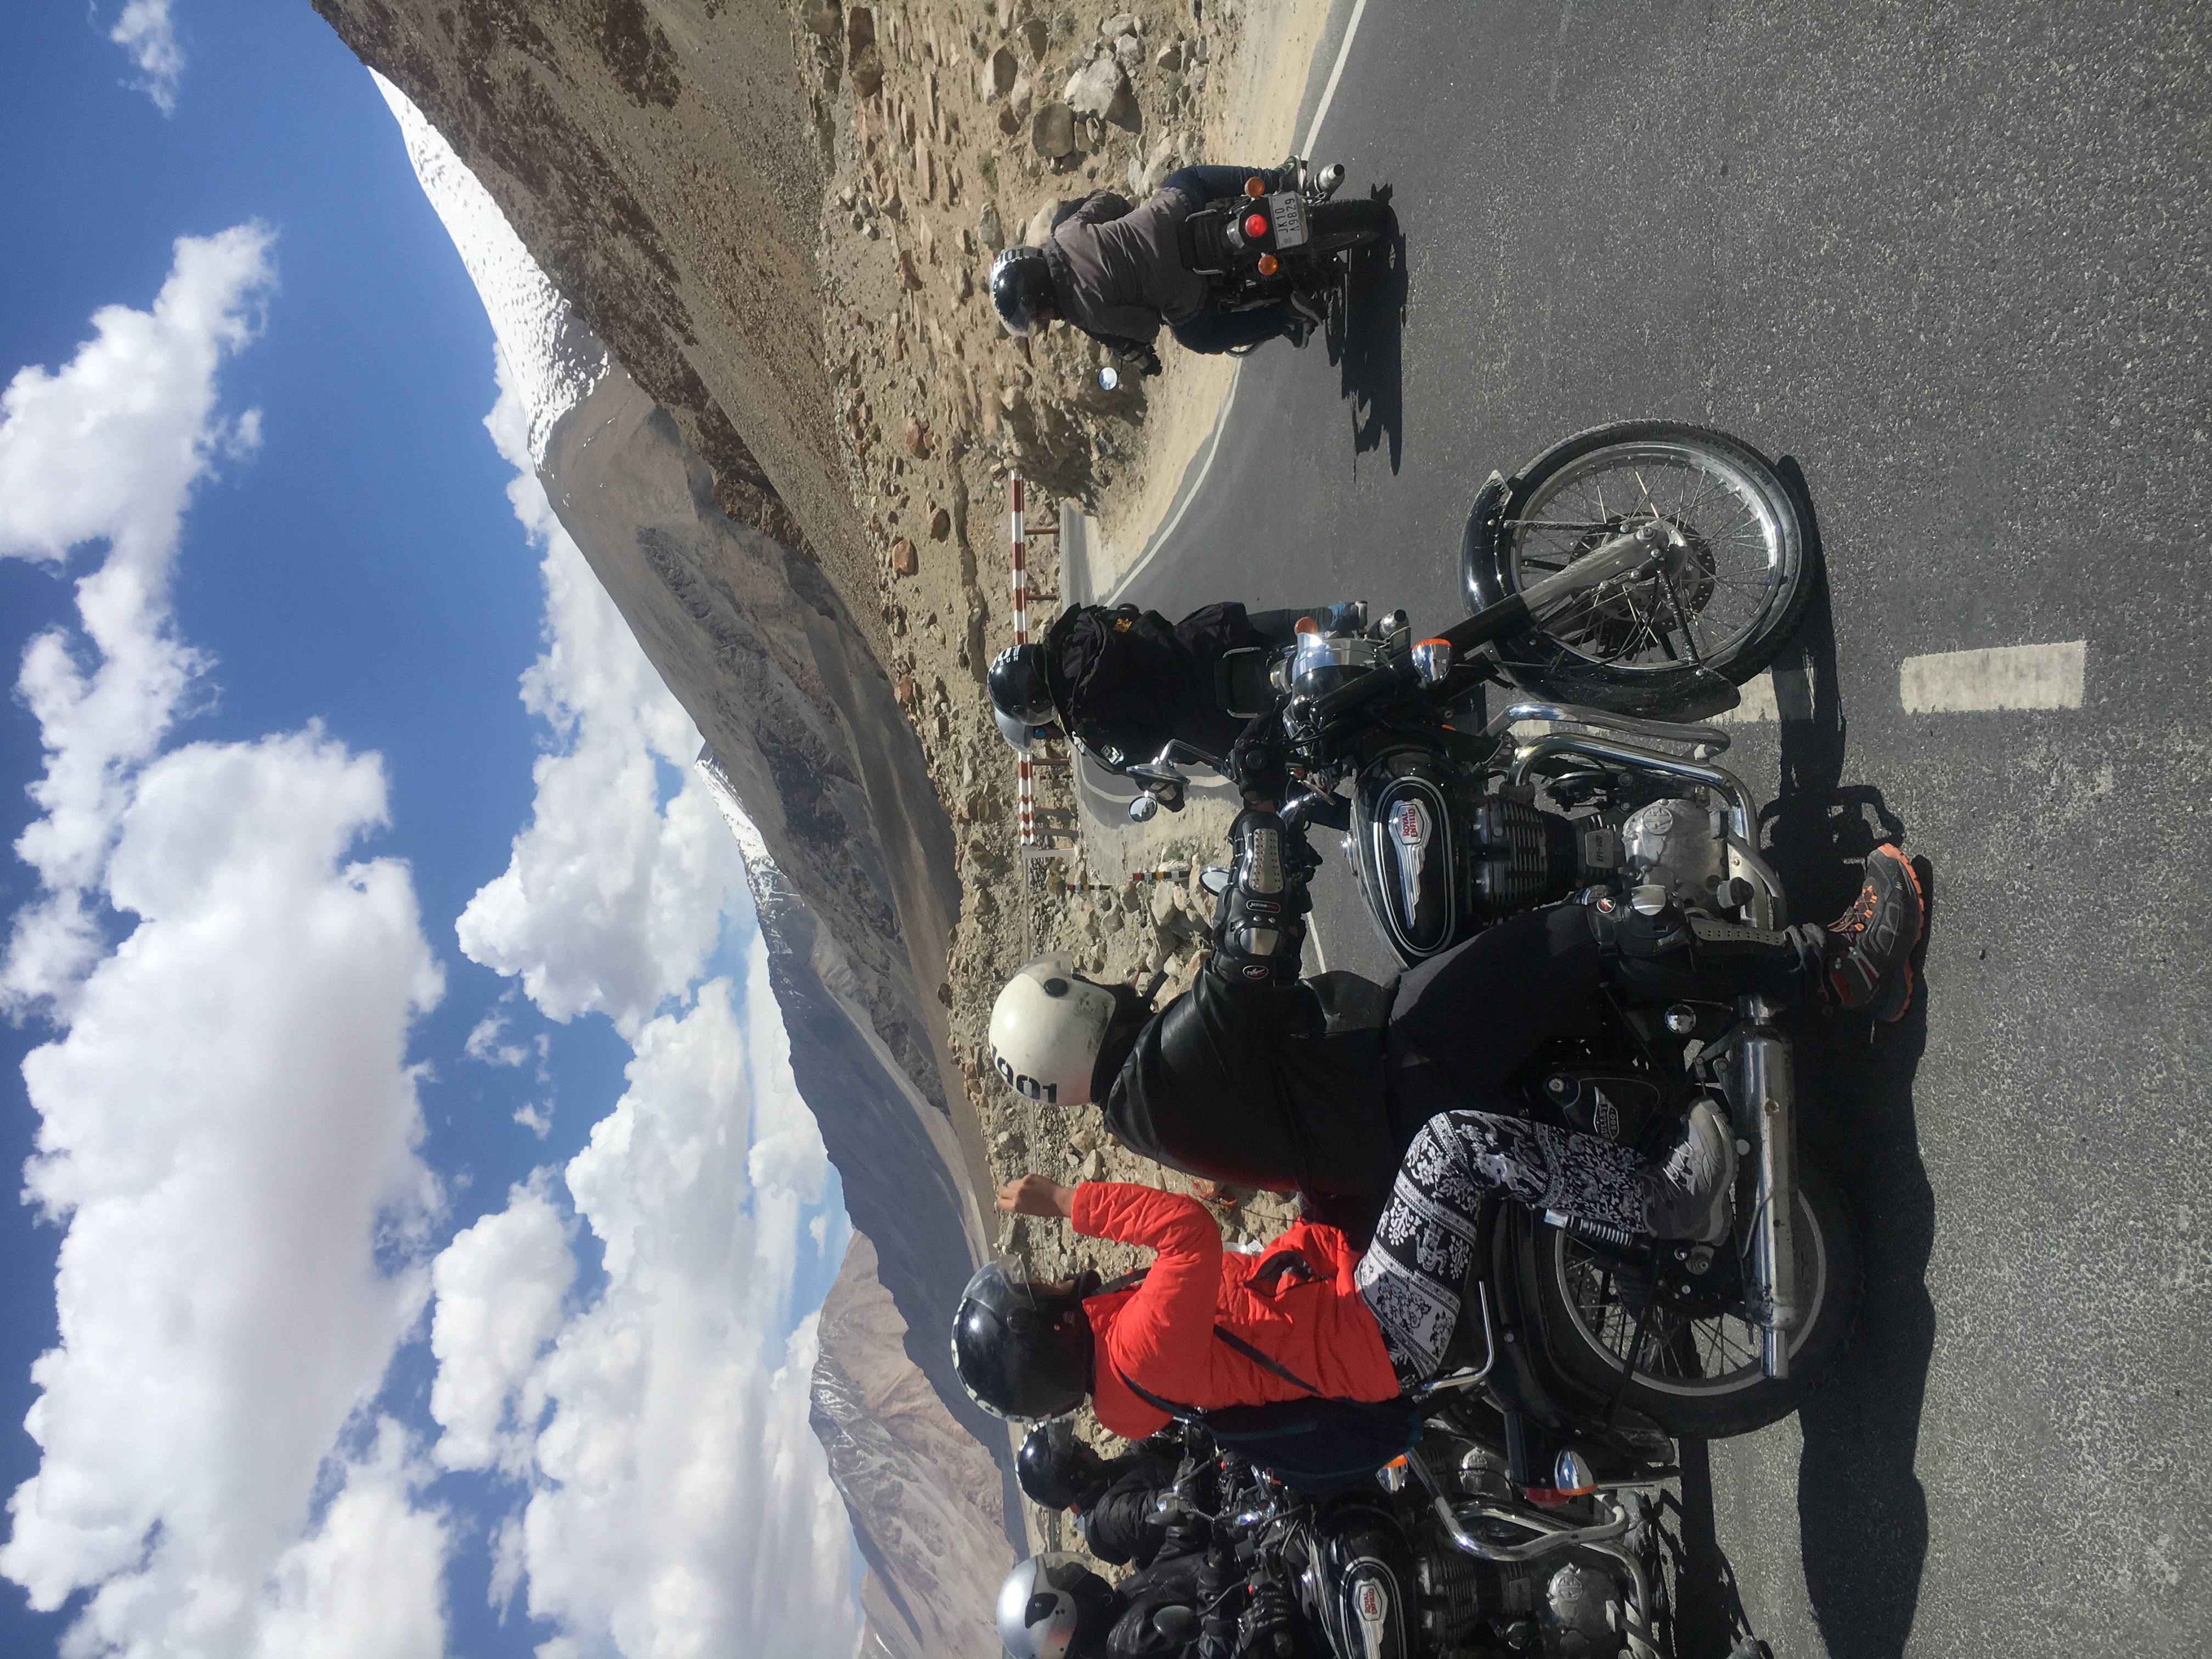 Experience the Thrill of a Bike Trip to Manali from Delhi with Crazy Riders Adventure Tours - Crazy Riders